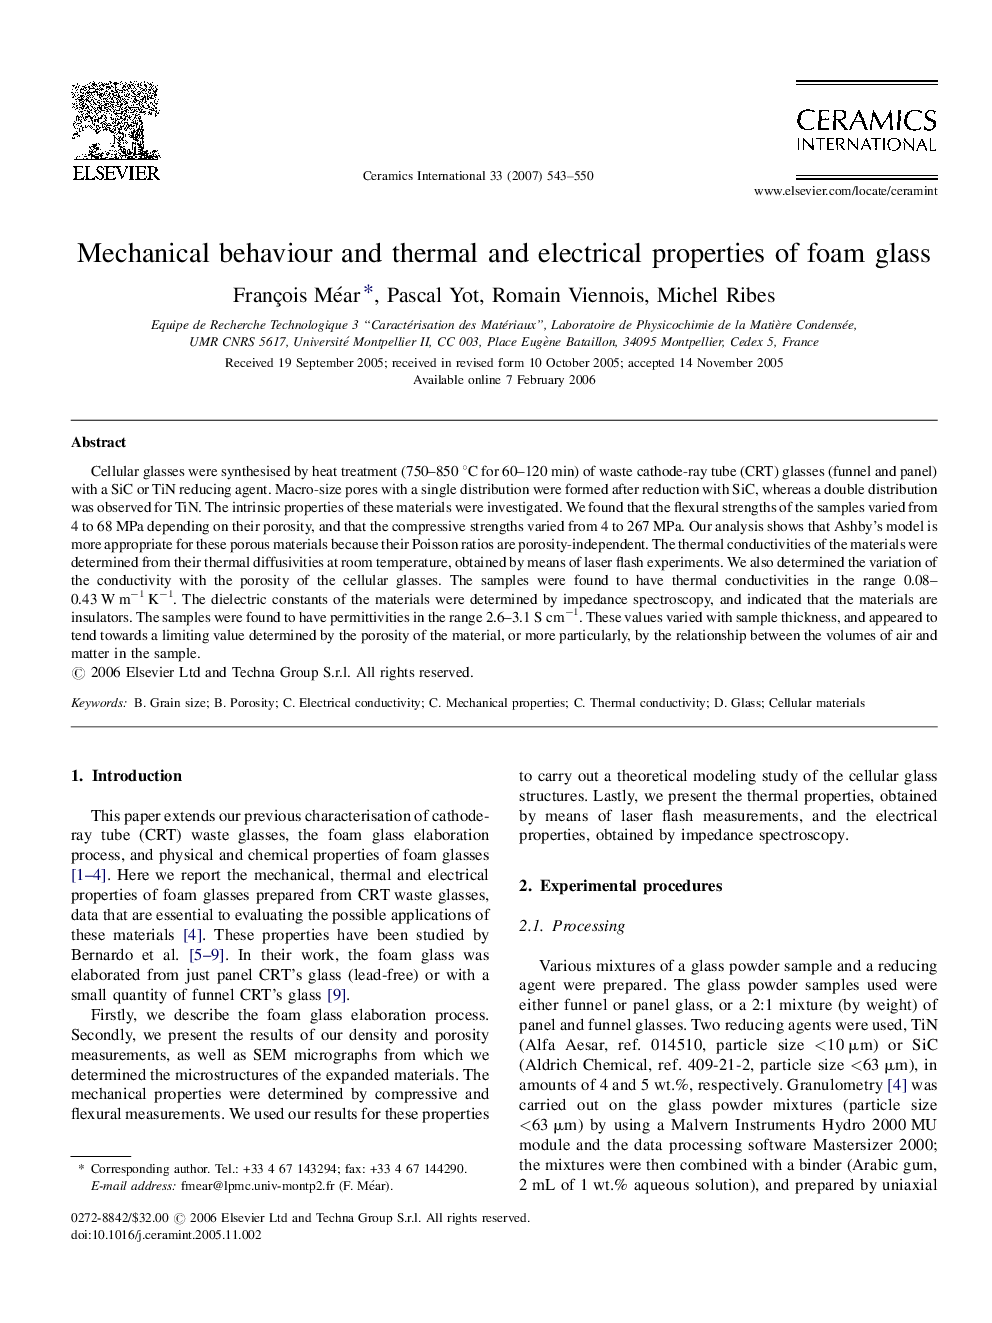 Mechanical behaviour and thermal and electrical properties of foam glass